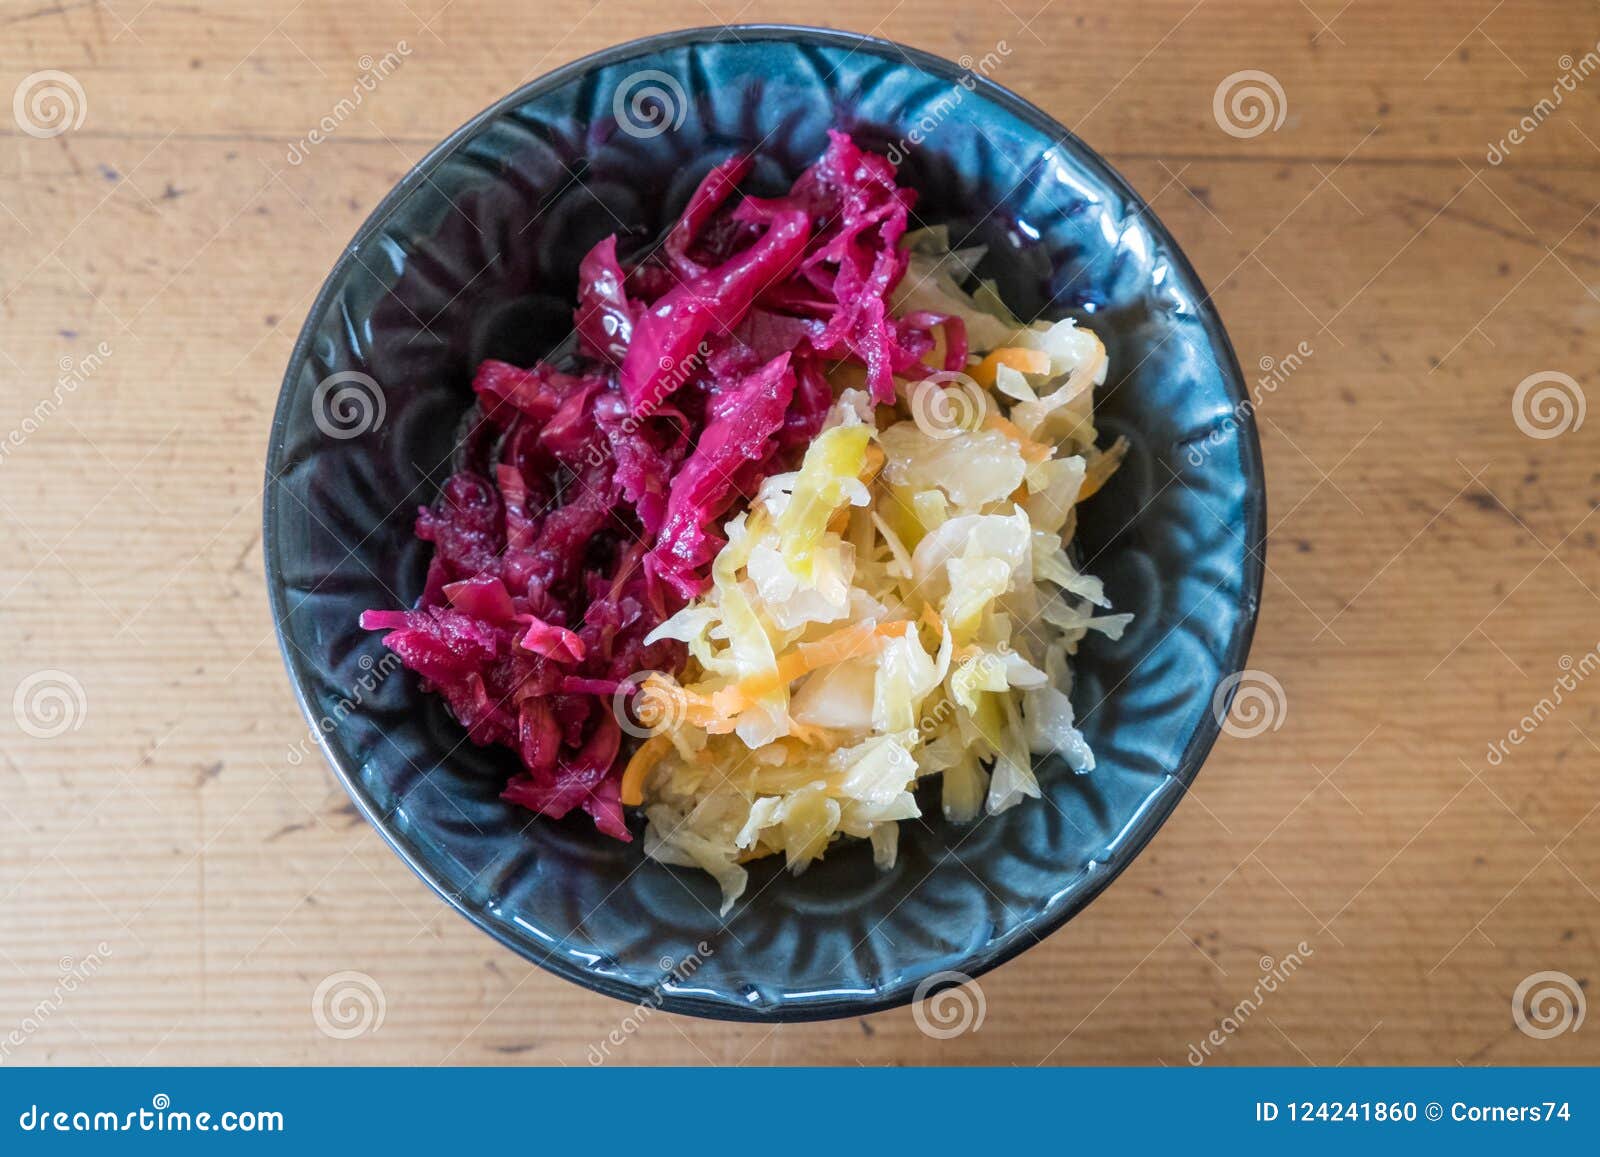 colorful sauerkraut home made fermented food from red and green